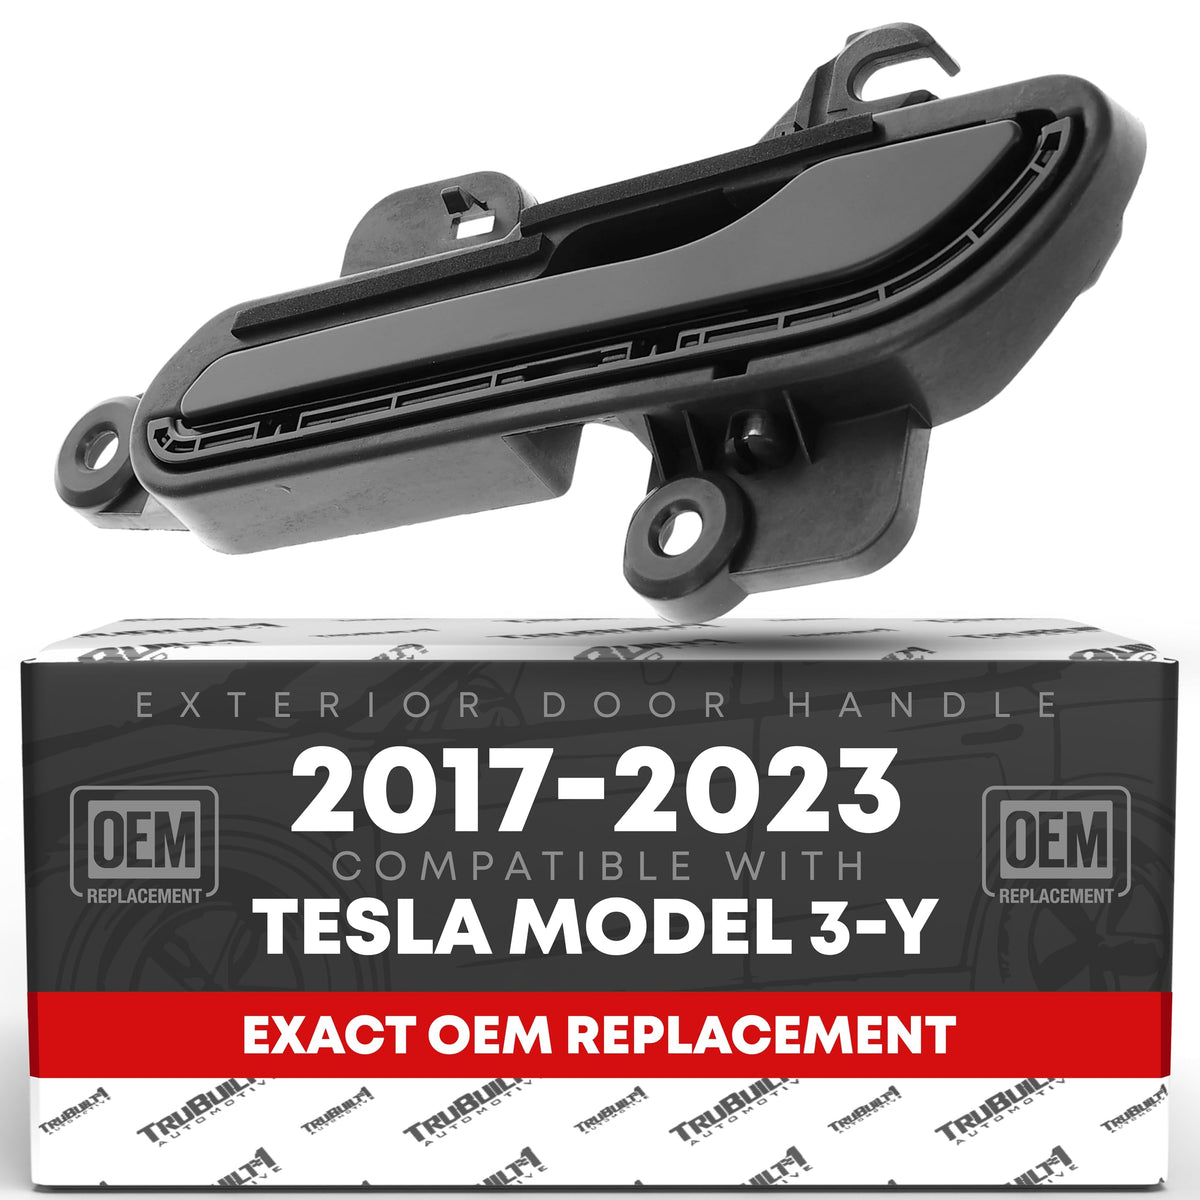 Exterior Front and Rear Driver's side Door Handle Compatible with 2017-2022 Tesla Model 3, 2020 - 2023 Model Y - Smooth Black, OEM Replacement Part# 1081831-00-J, 1528114-00-B, 15757